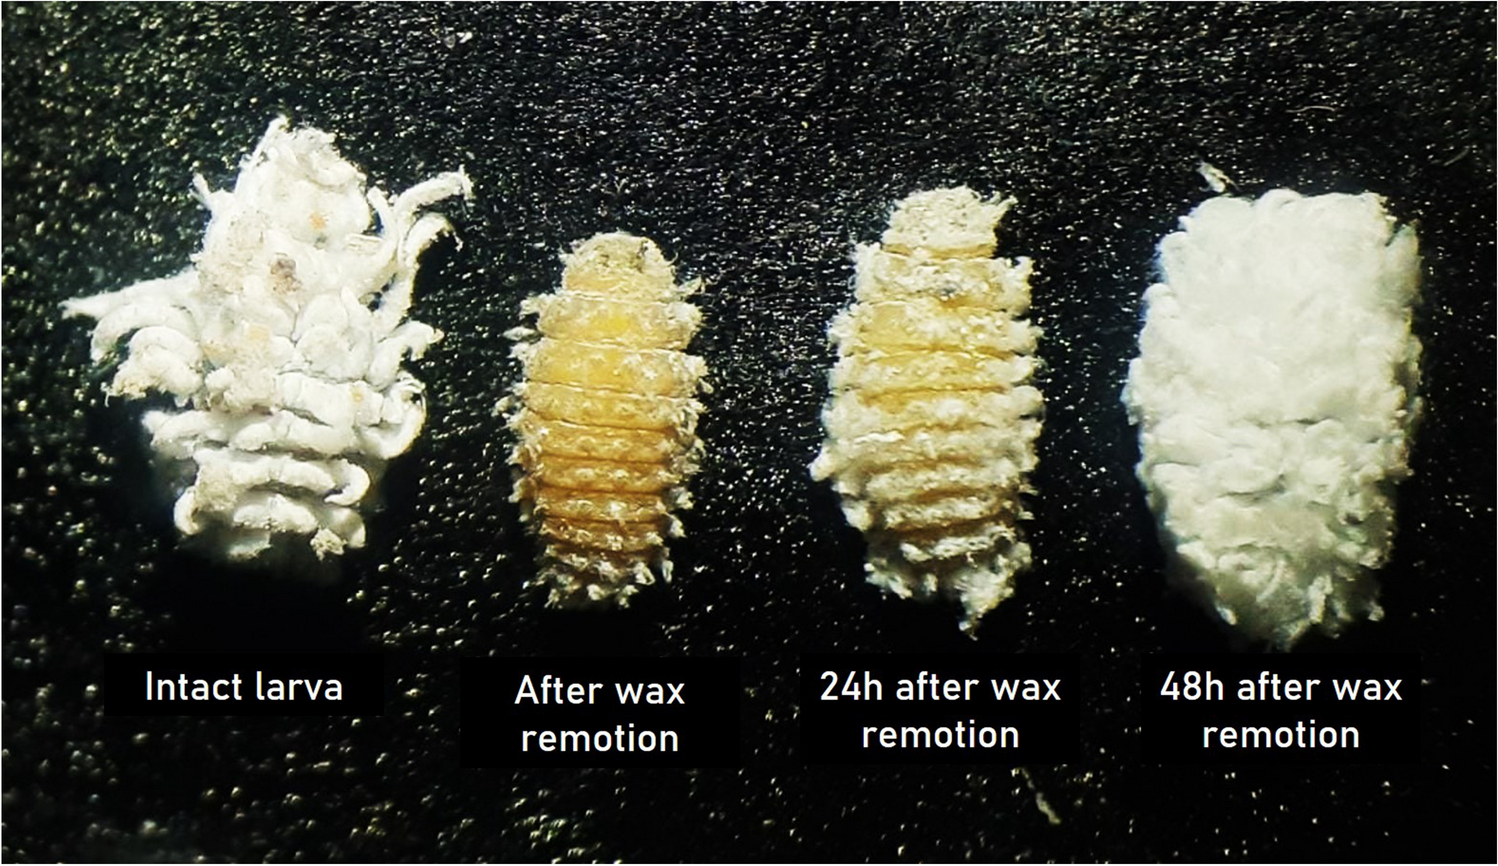 Larvae of Cryptolaemus montrouzieri (Coleoptera: Coccinellidae) Prioritize Secretion of Protective Wax Over Daily Consumption and Growth